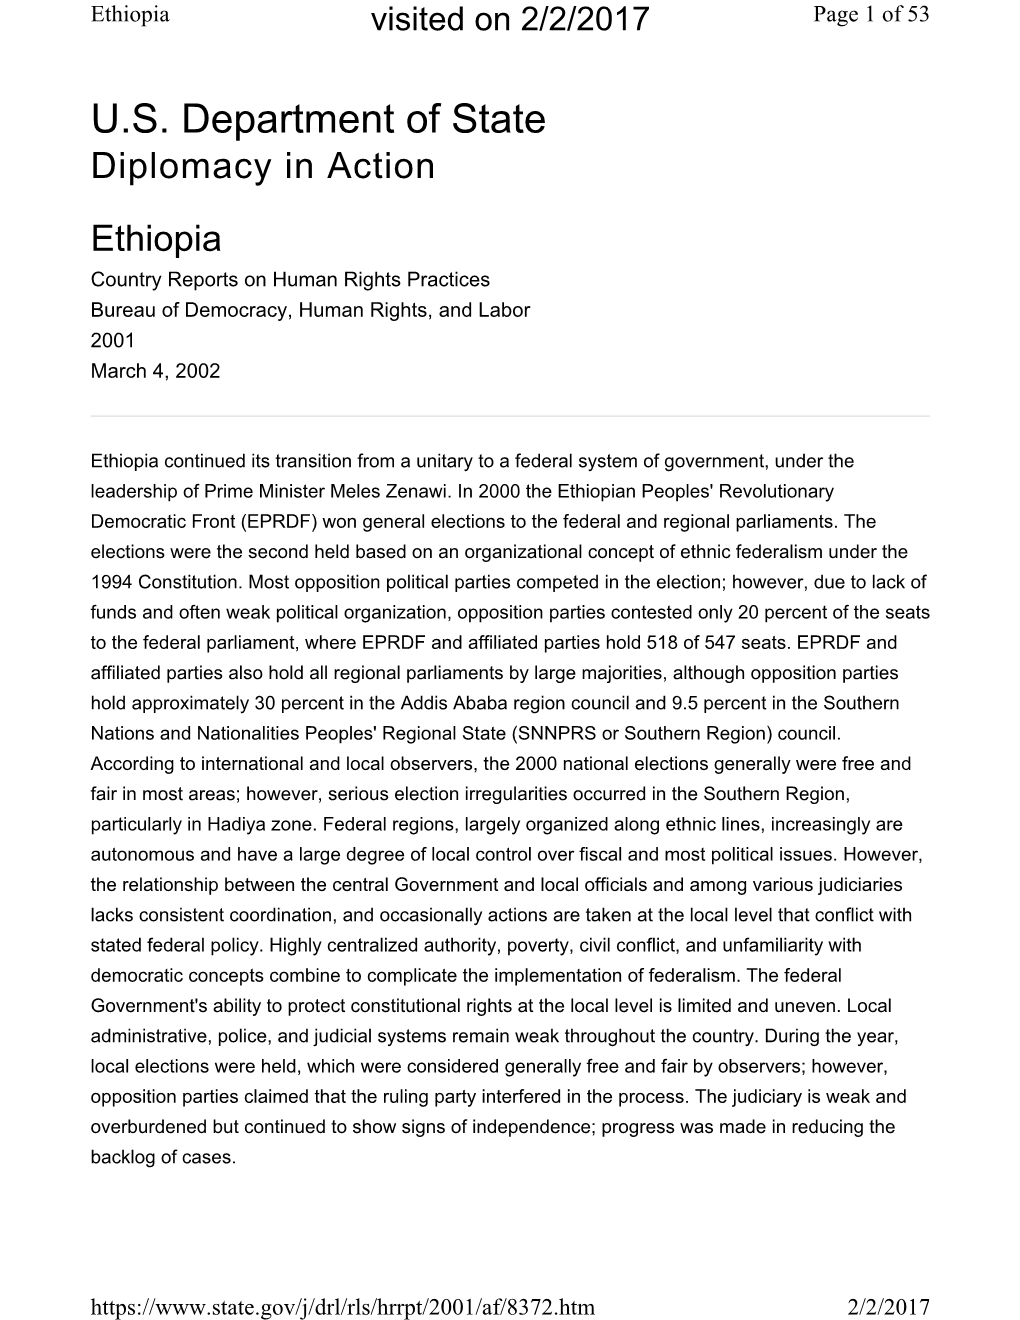 U.S. Department of State Diplomacy in Action Ethiopia Country Reports on Human Rights Practices Bureau of Democracy, Human Rights, and Labor 2001 March 4, 2002